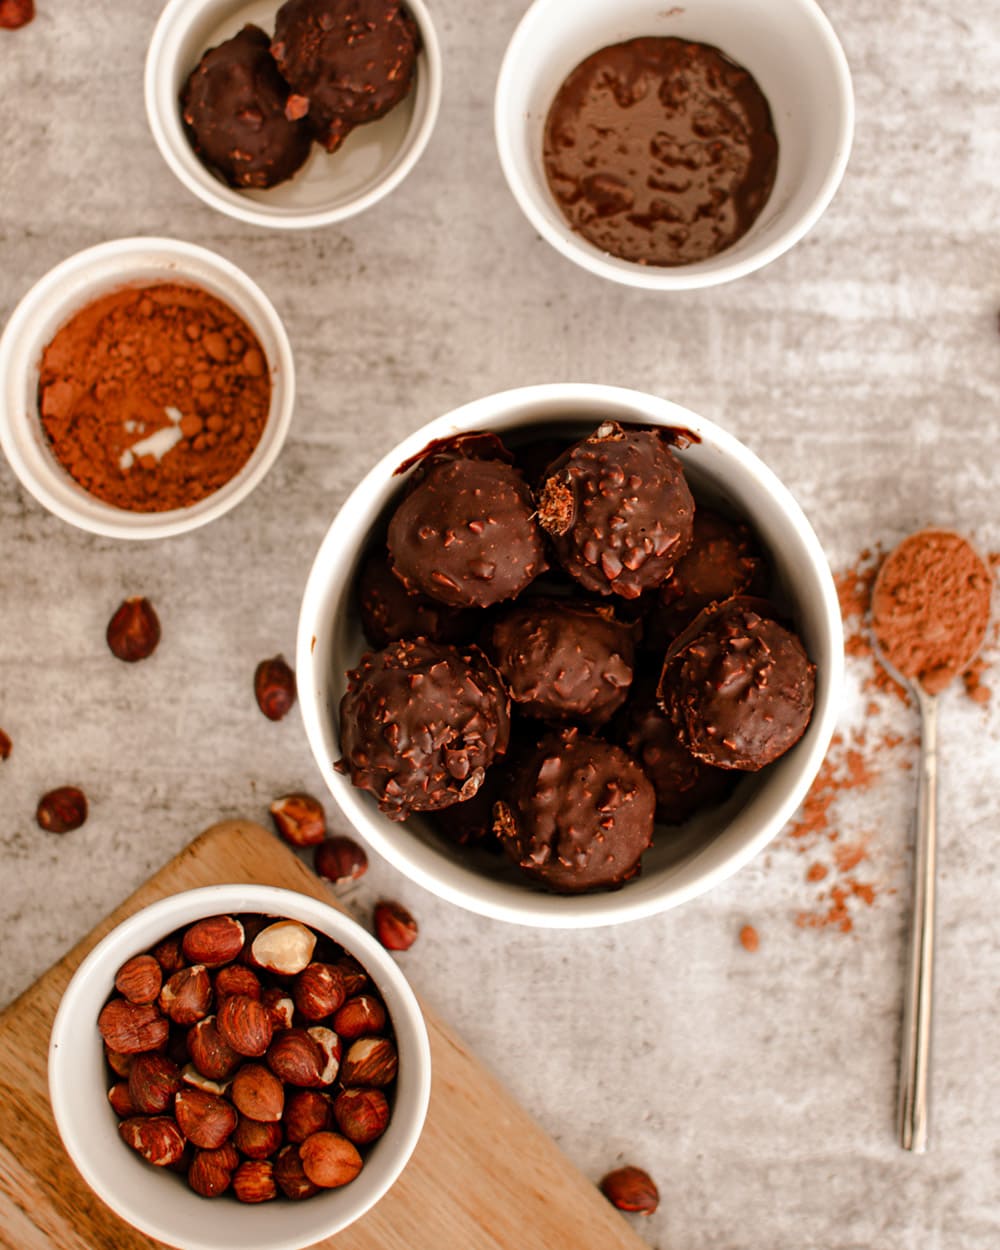 Overhead image of date balls and bowls of hazelnuts and other ingredients.